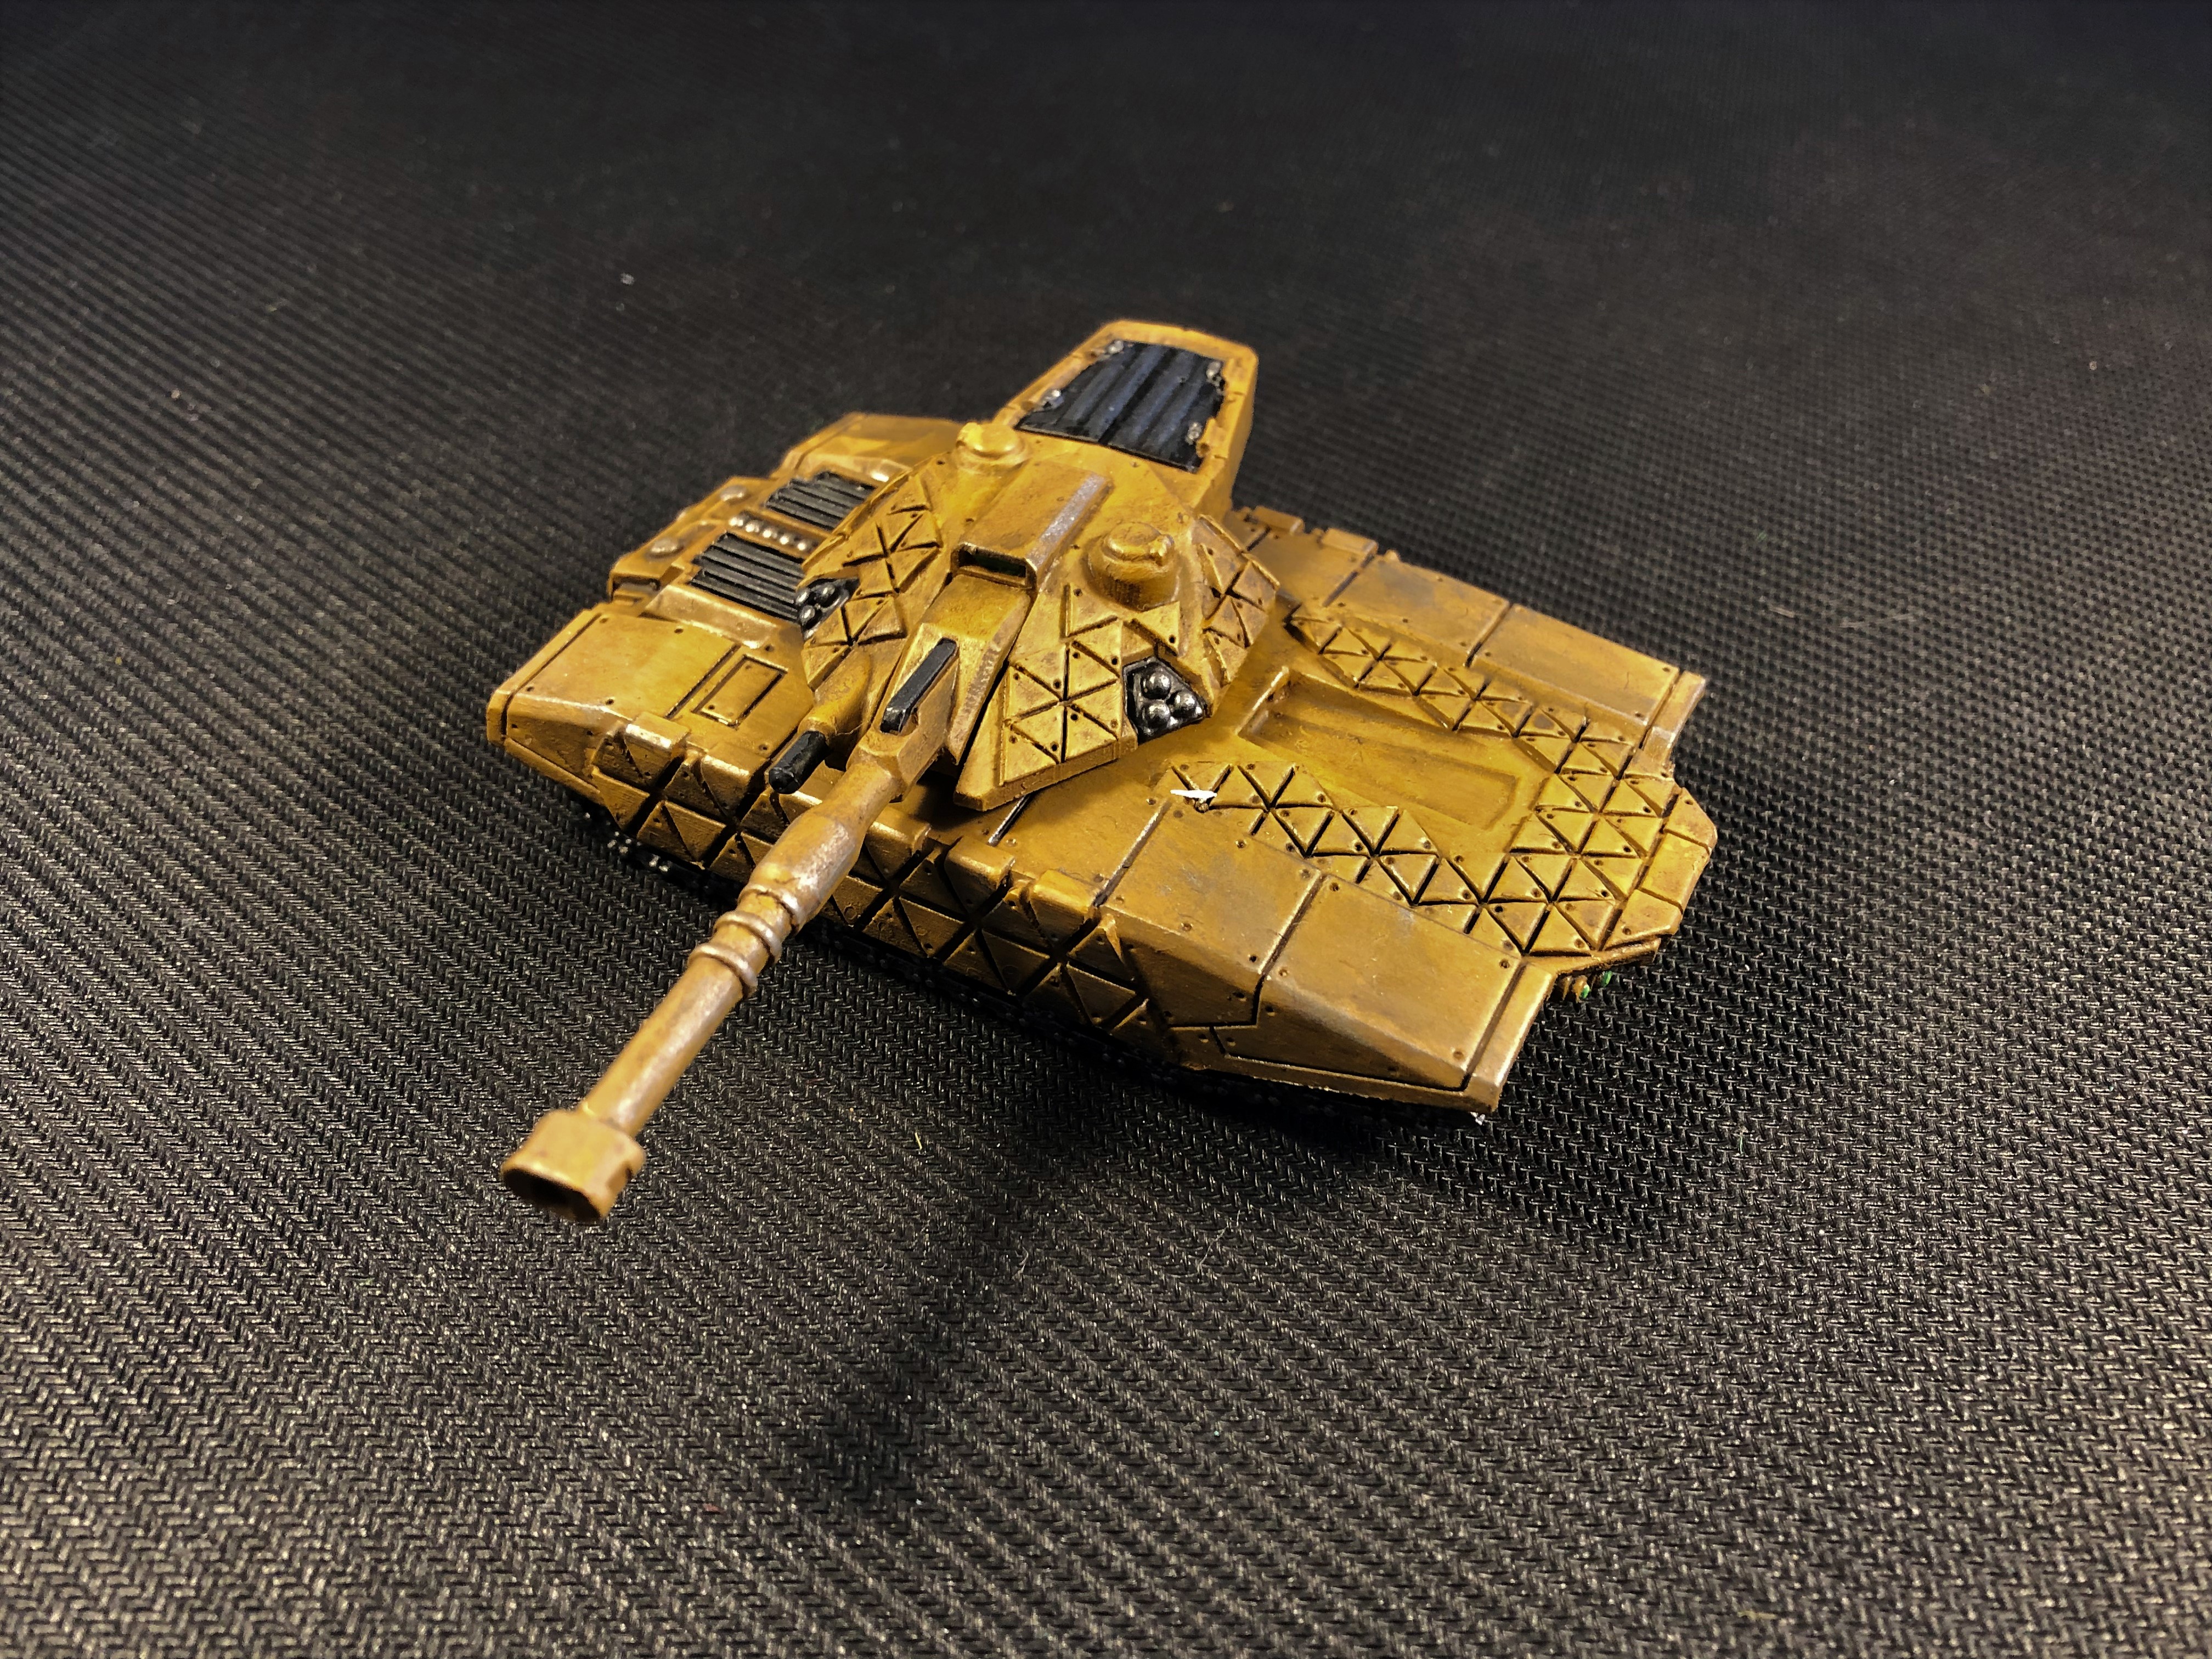 Anvil Battle Tank available for general release